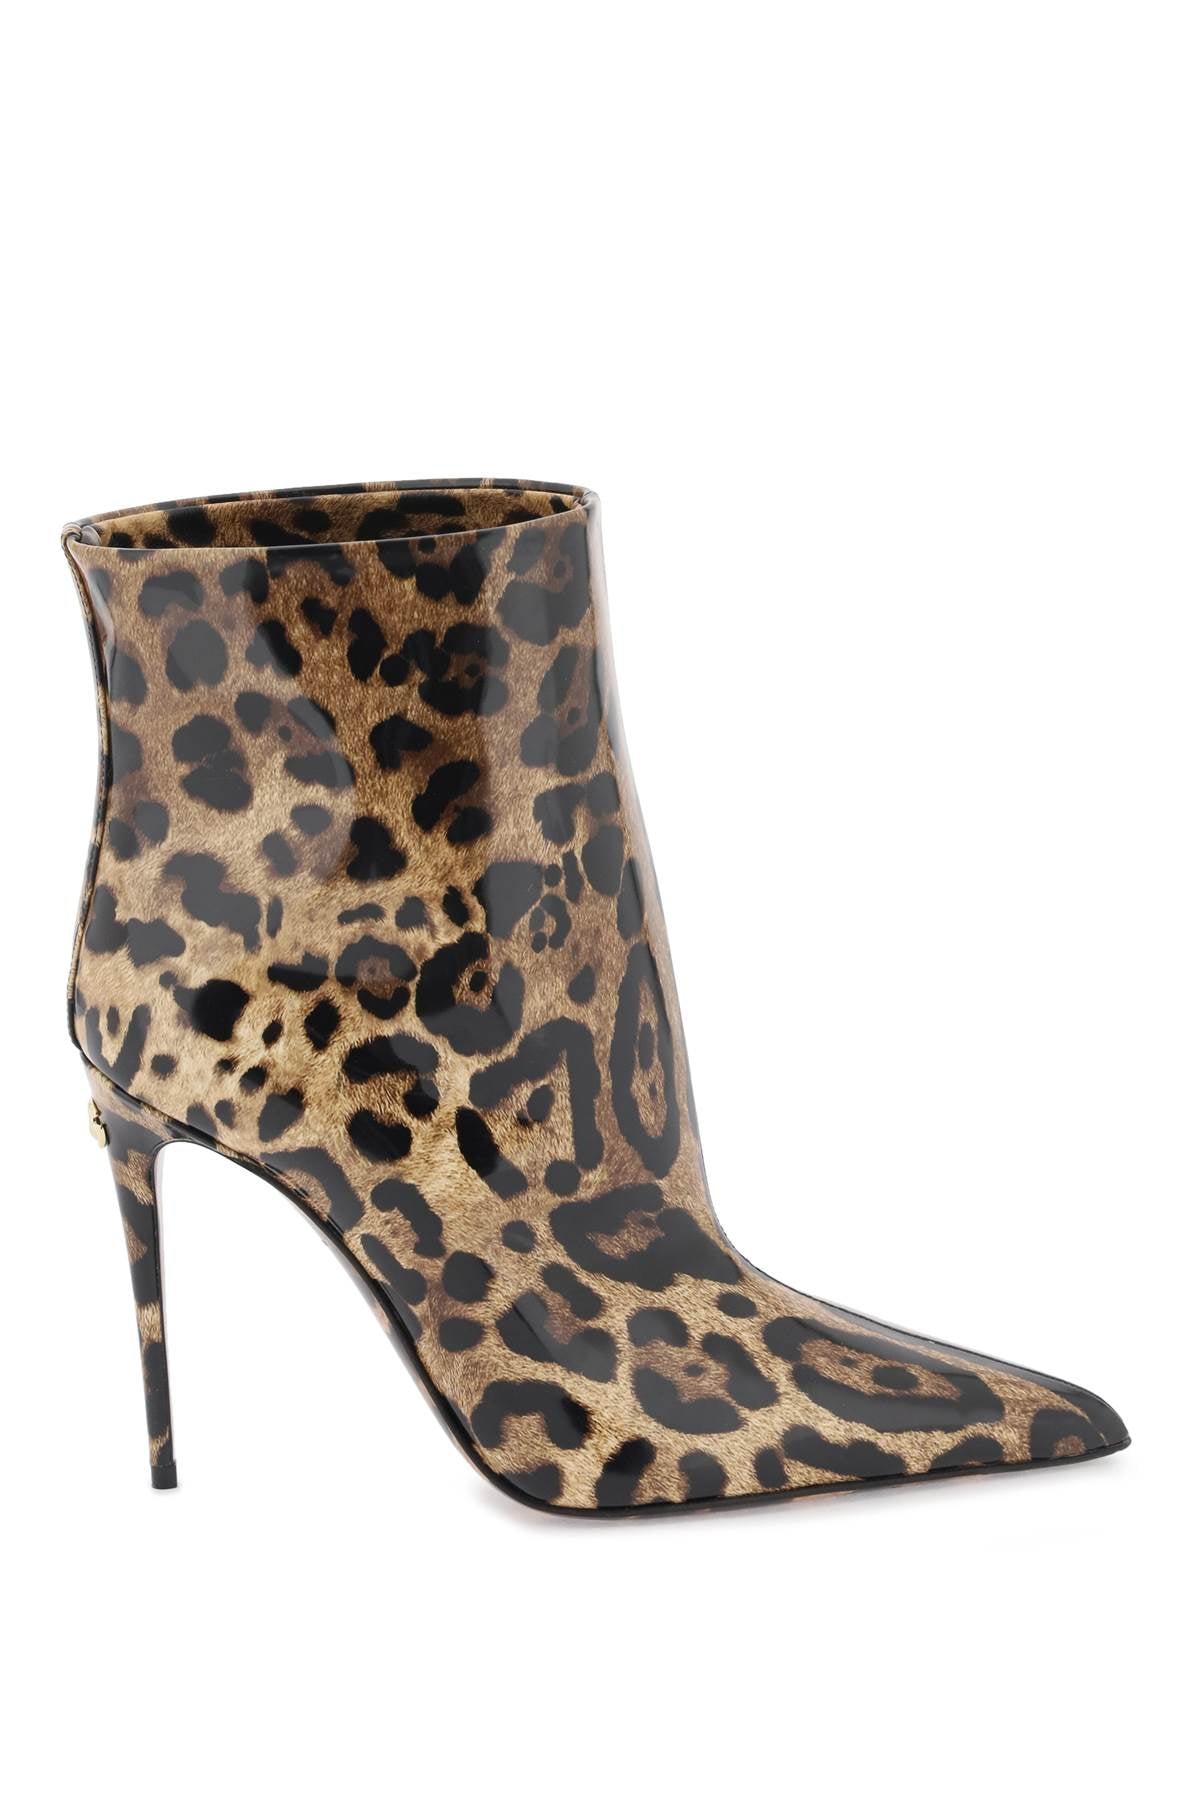 Dolce & gabbana glossy leather ankle boots-0